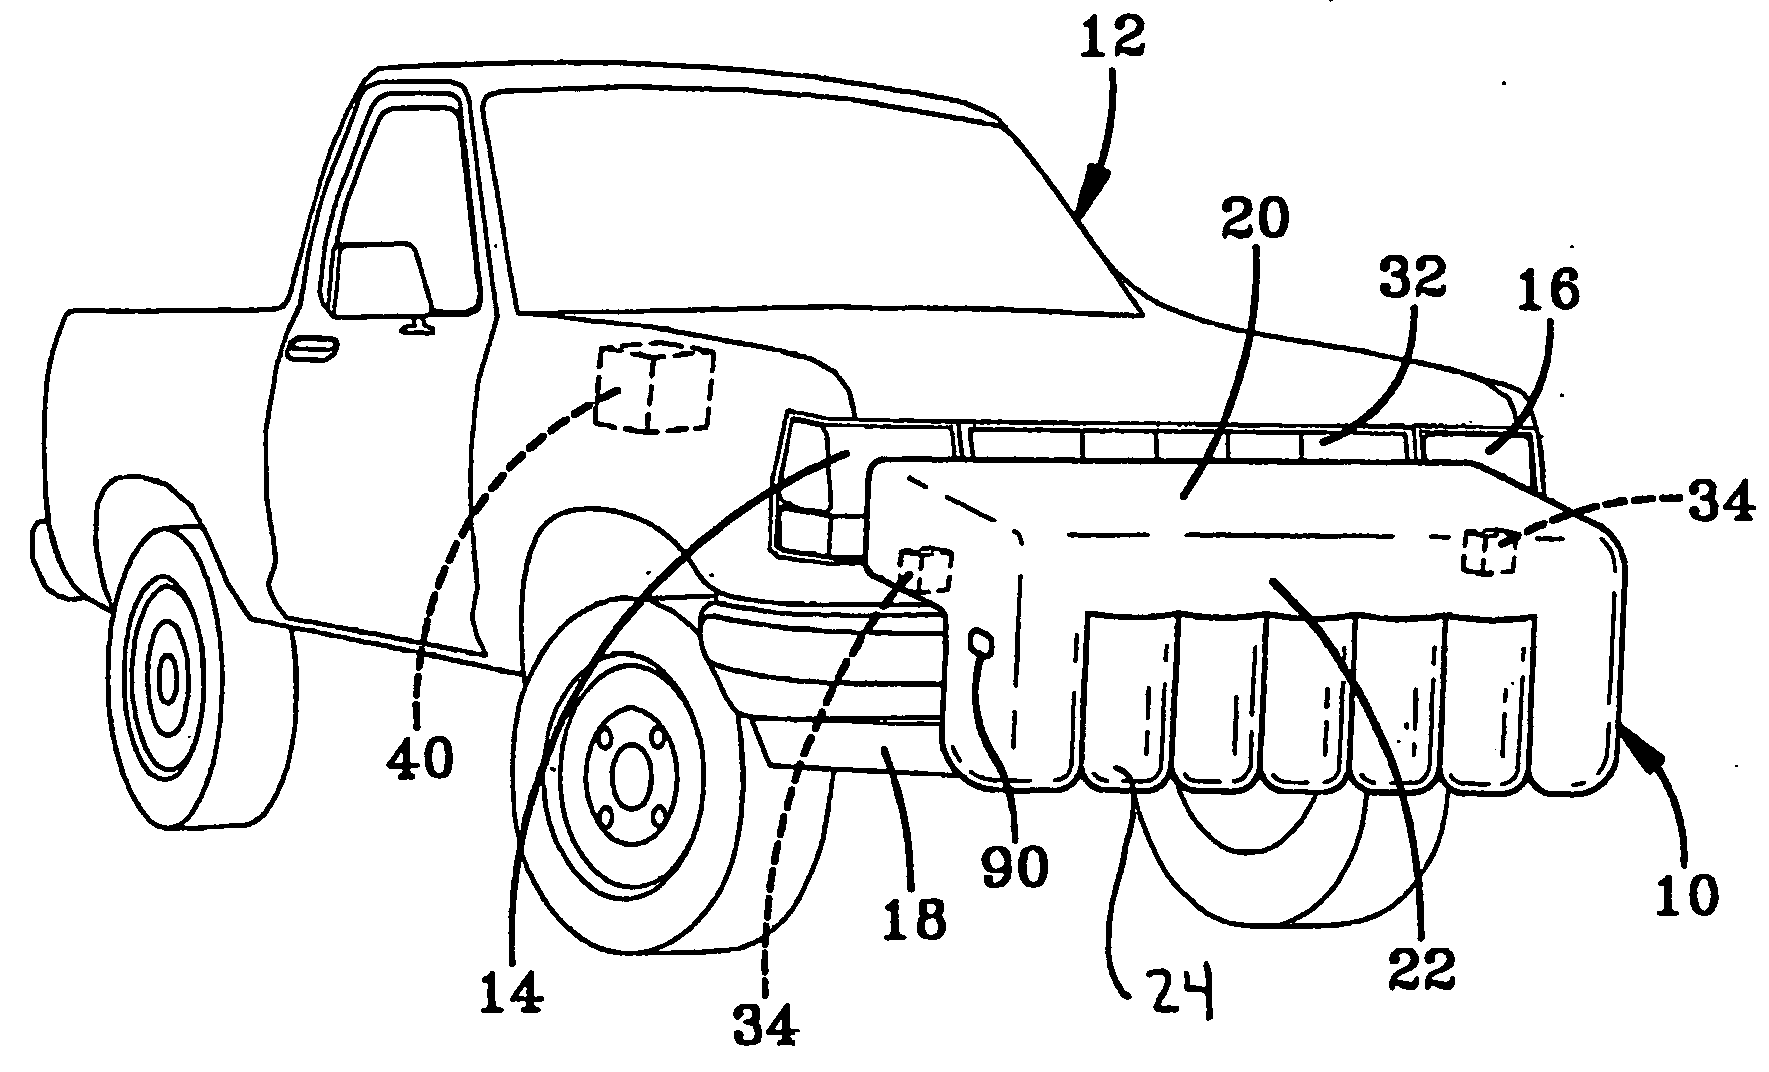 Bumper airbag and system